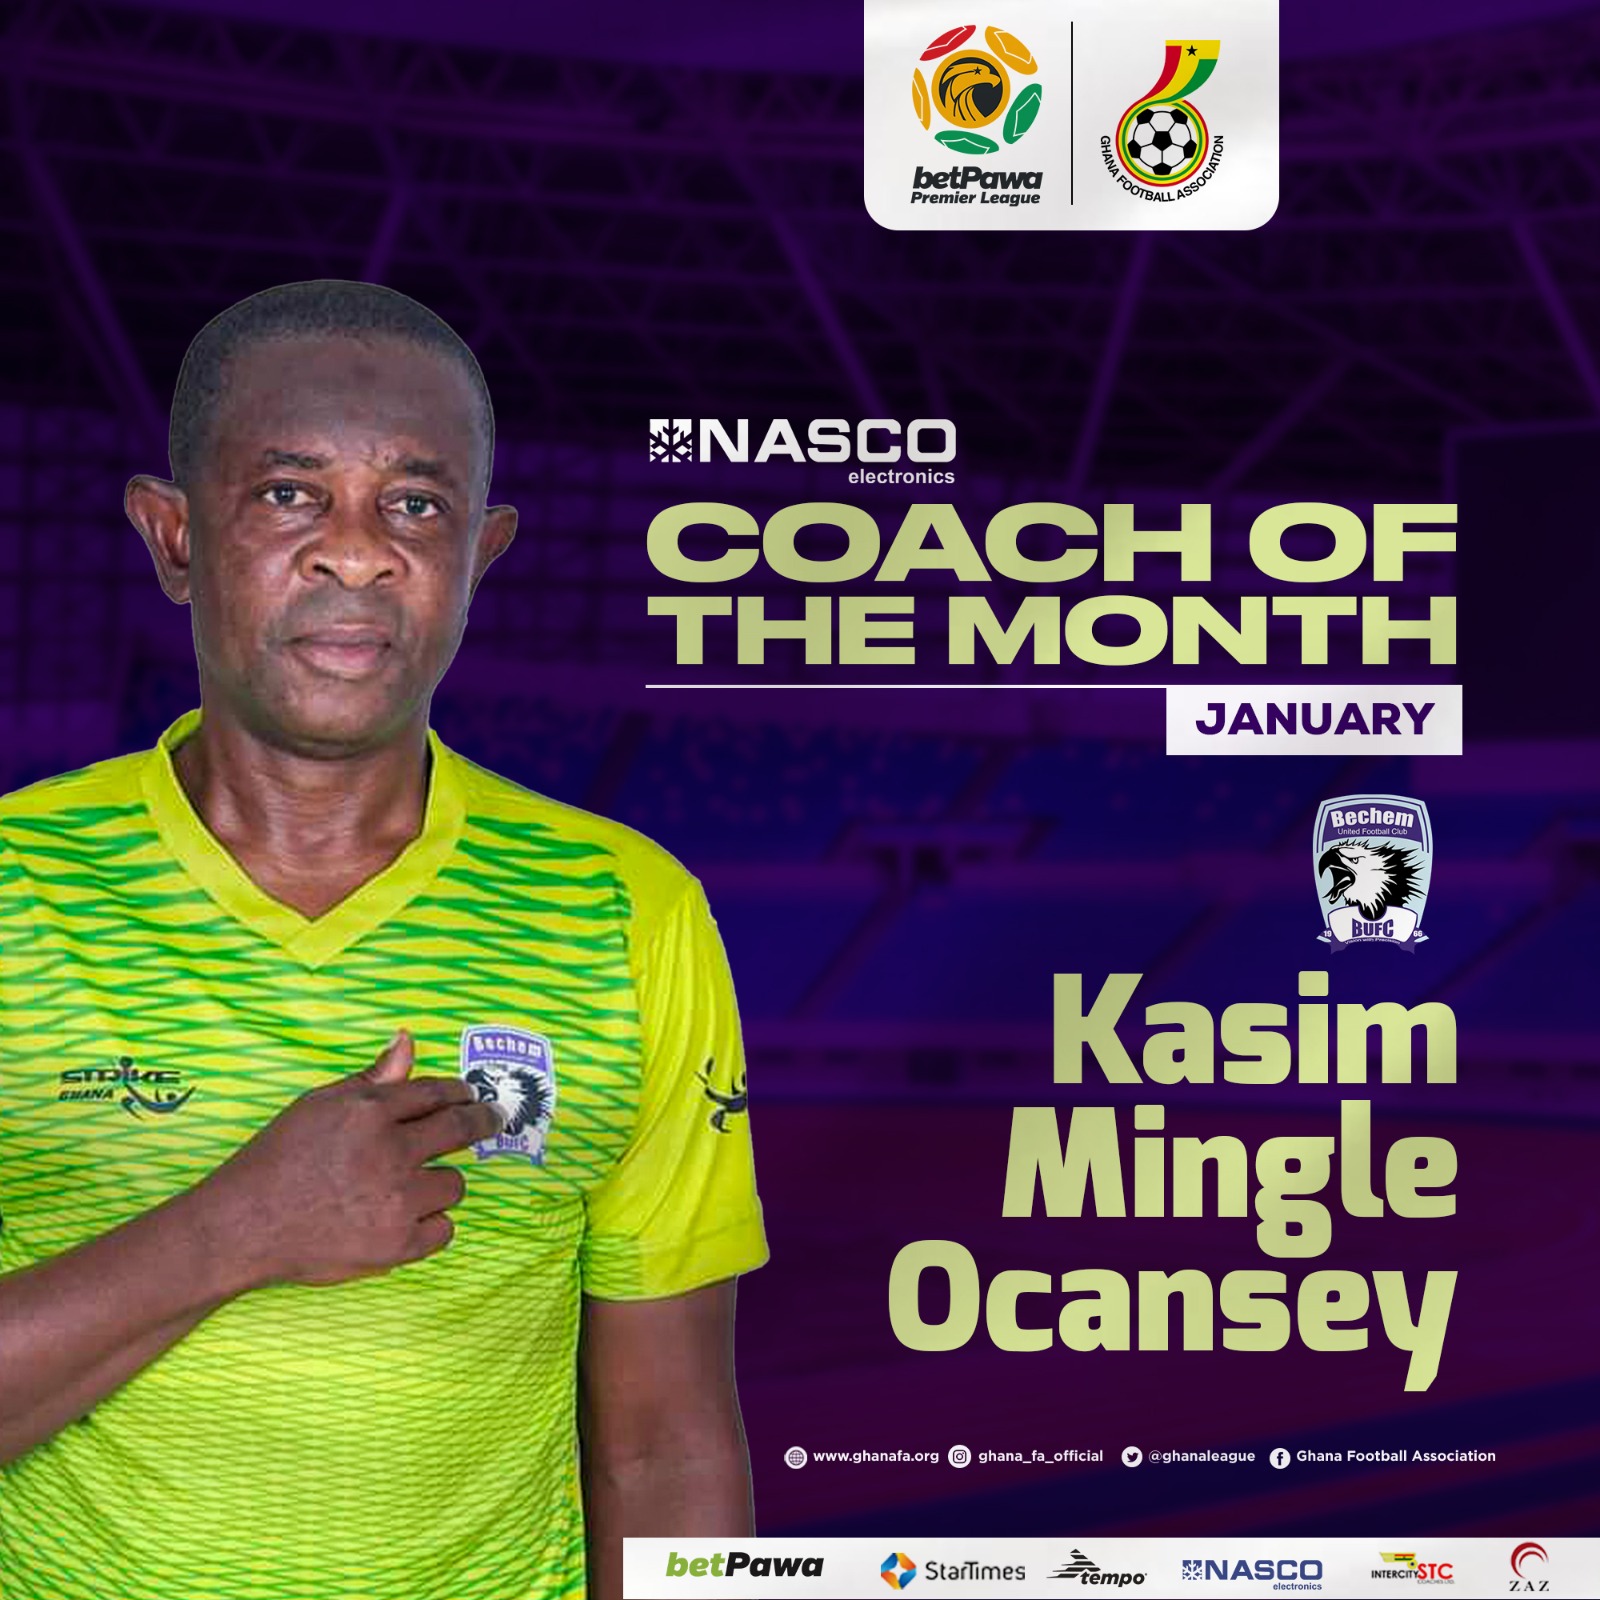 Kassim Mingle wins NASCO Coach of the Month for January